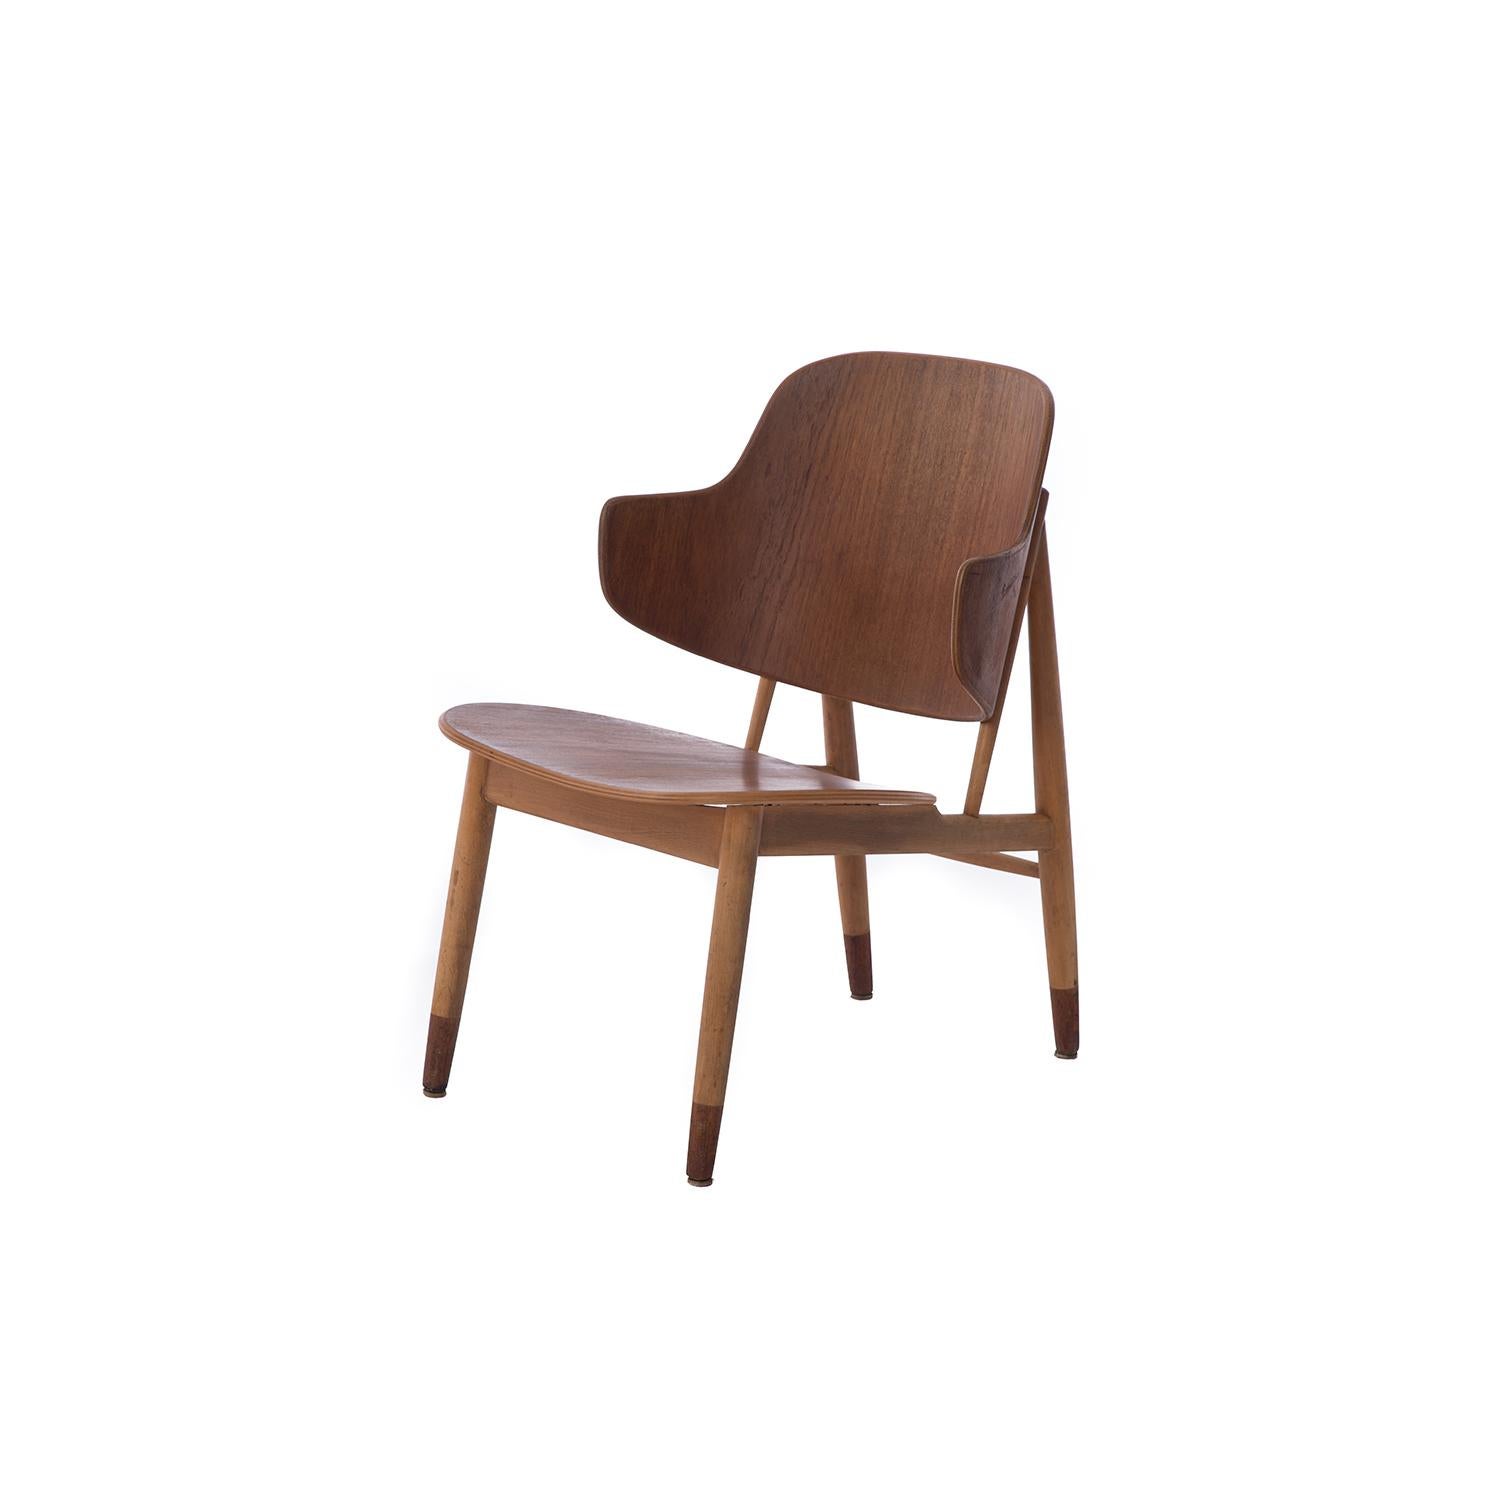 Theis original 'Penguin' Chair by Ib Kofod-Larsen ais crafted from teak and European beech wood. As comfortable as it is beautiful. 

Professional, skilled furniture restoration is an integral part of what we do every
day. Our goal is to provide